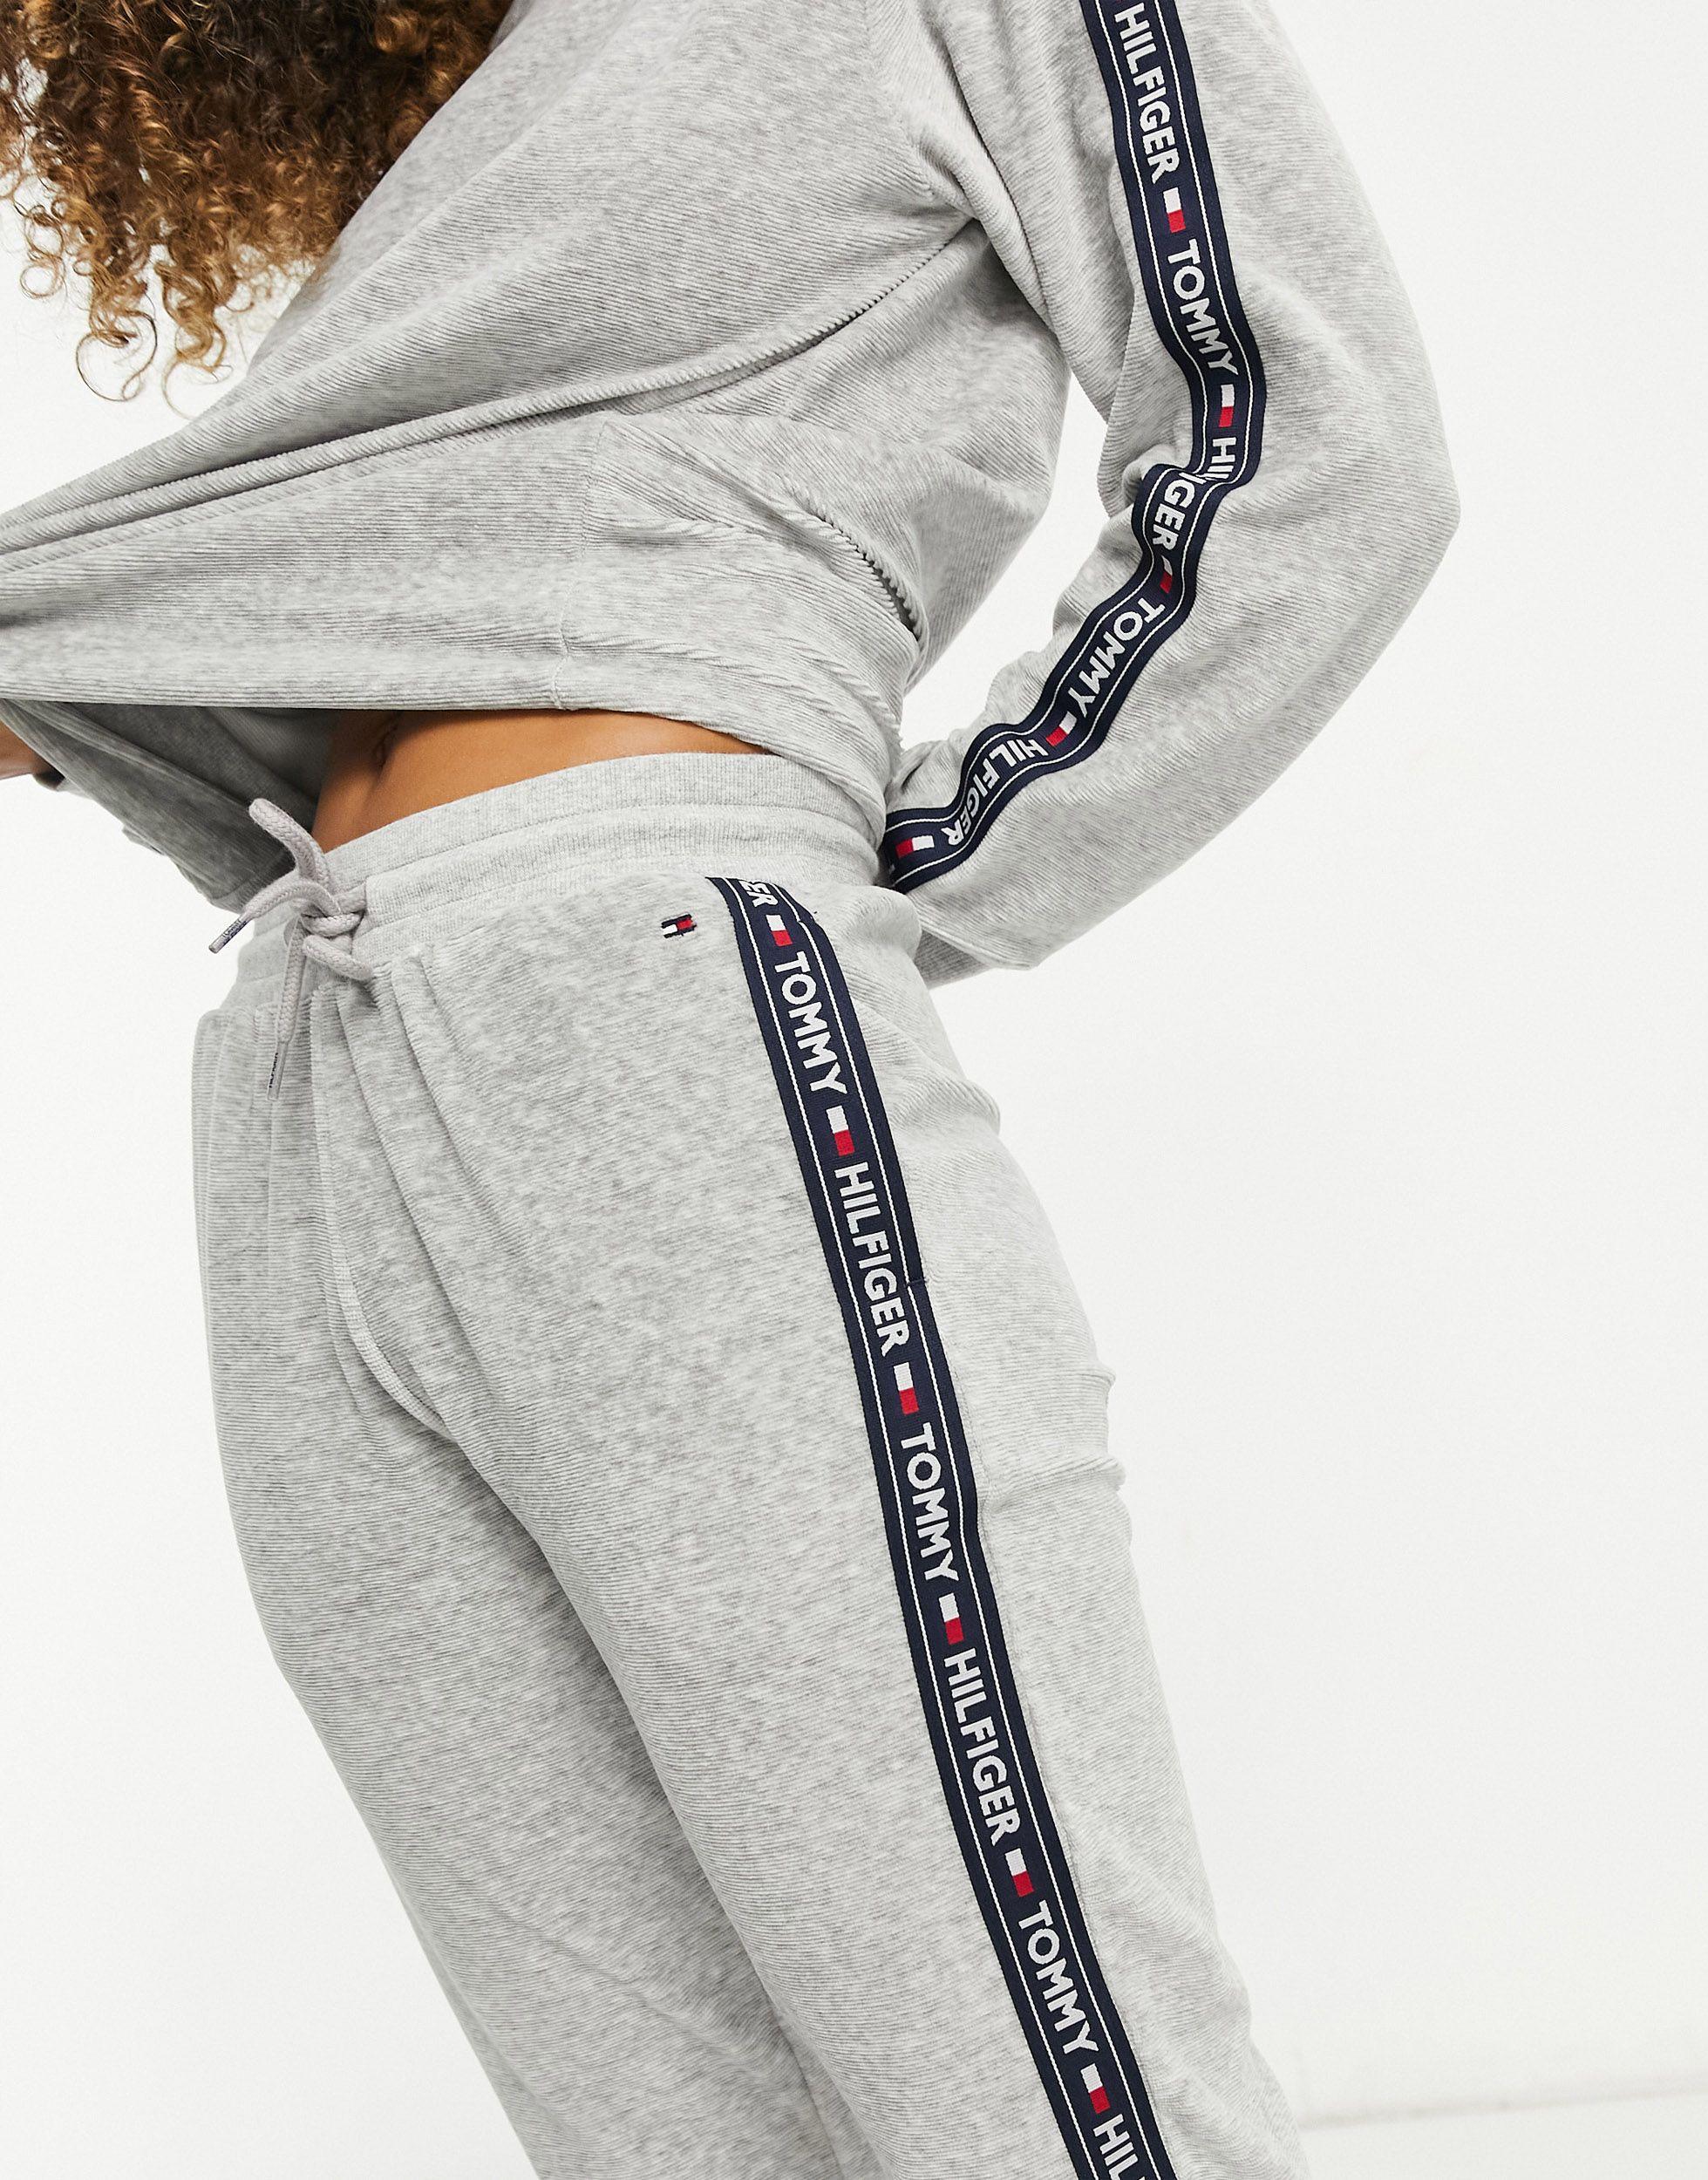 Tommy Hilfiger Womens Lounge Jogger